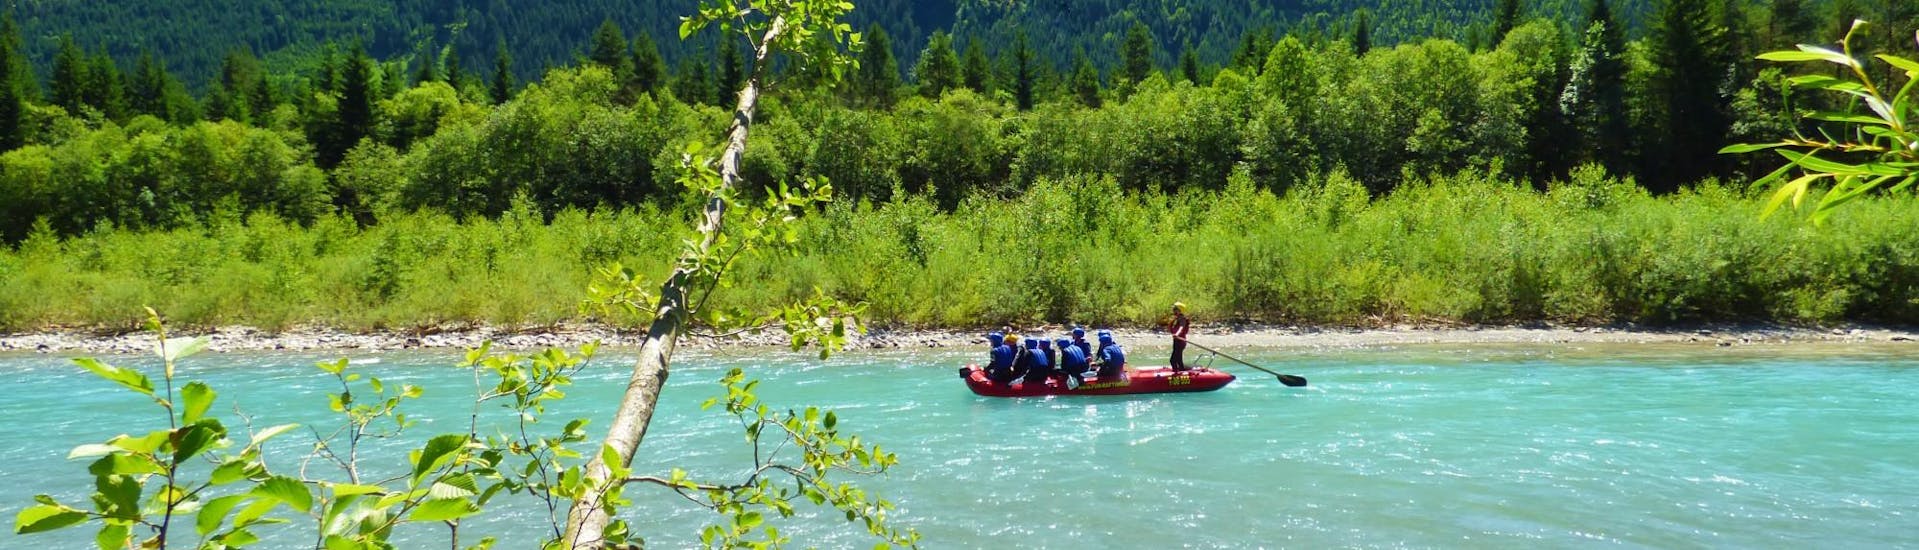 During their Half Day Rafting Tour on the Lech River with Fun Rafting Lechtal, the participants paddle through the green landscape of the Lechtal valley.